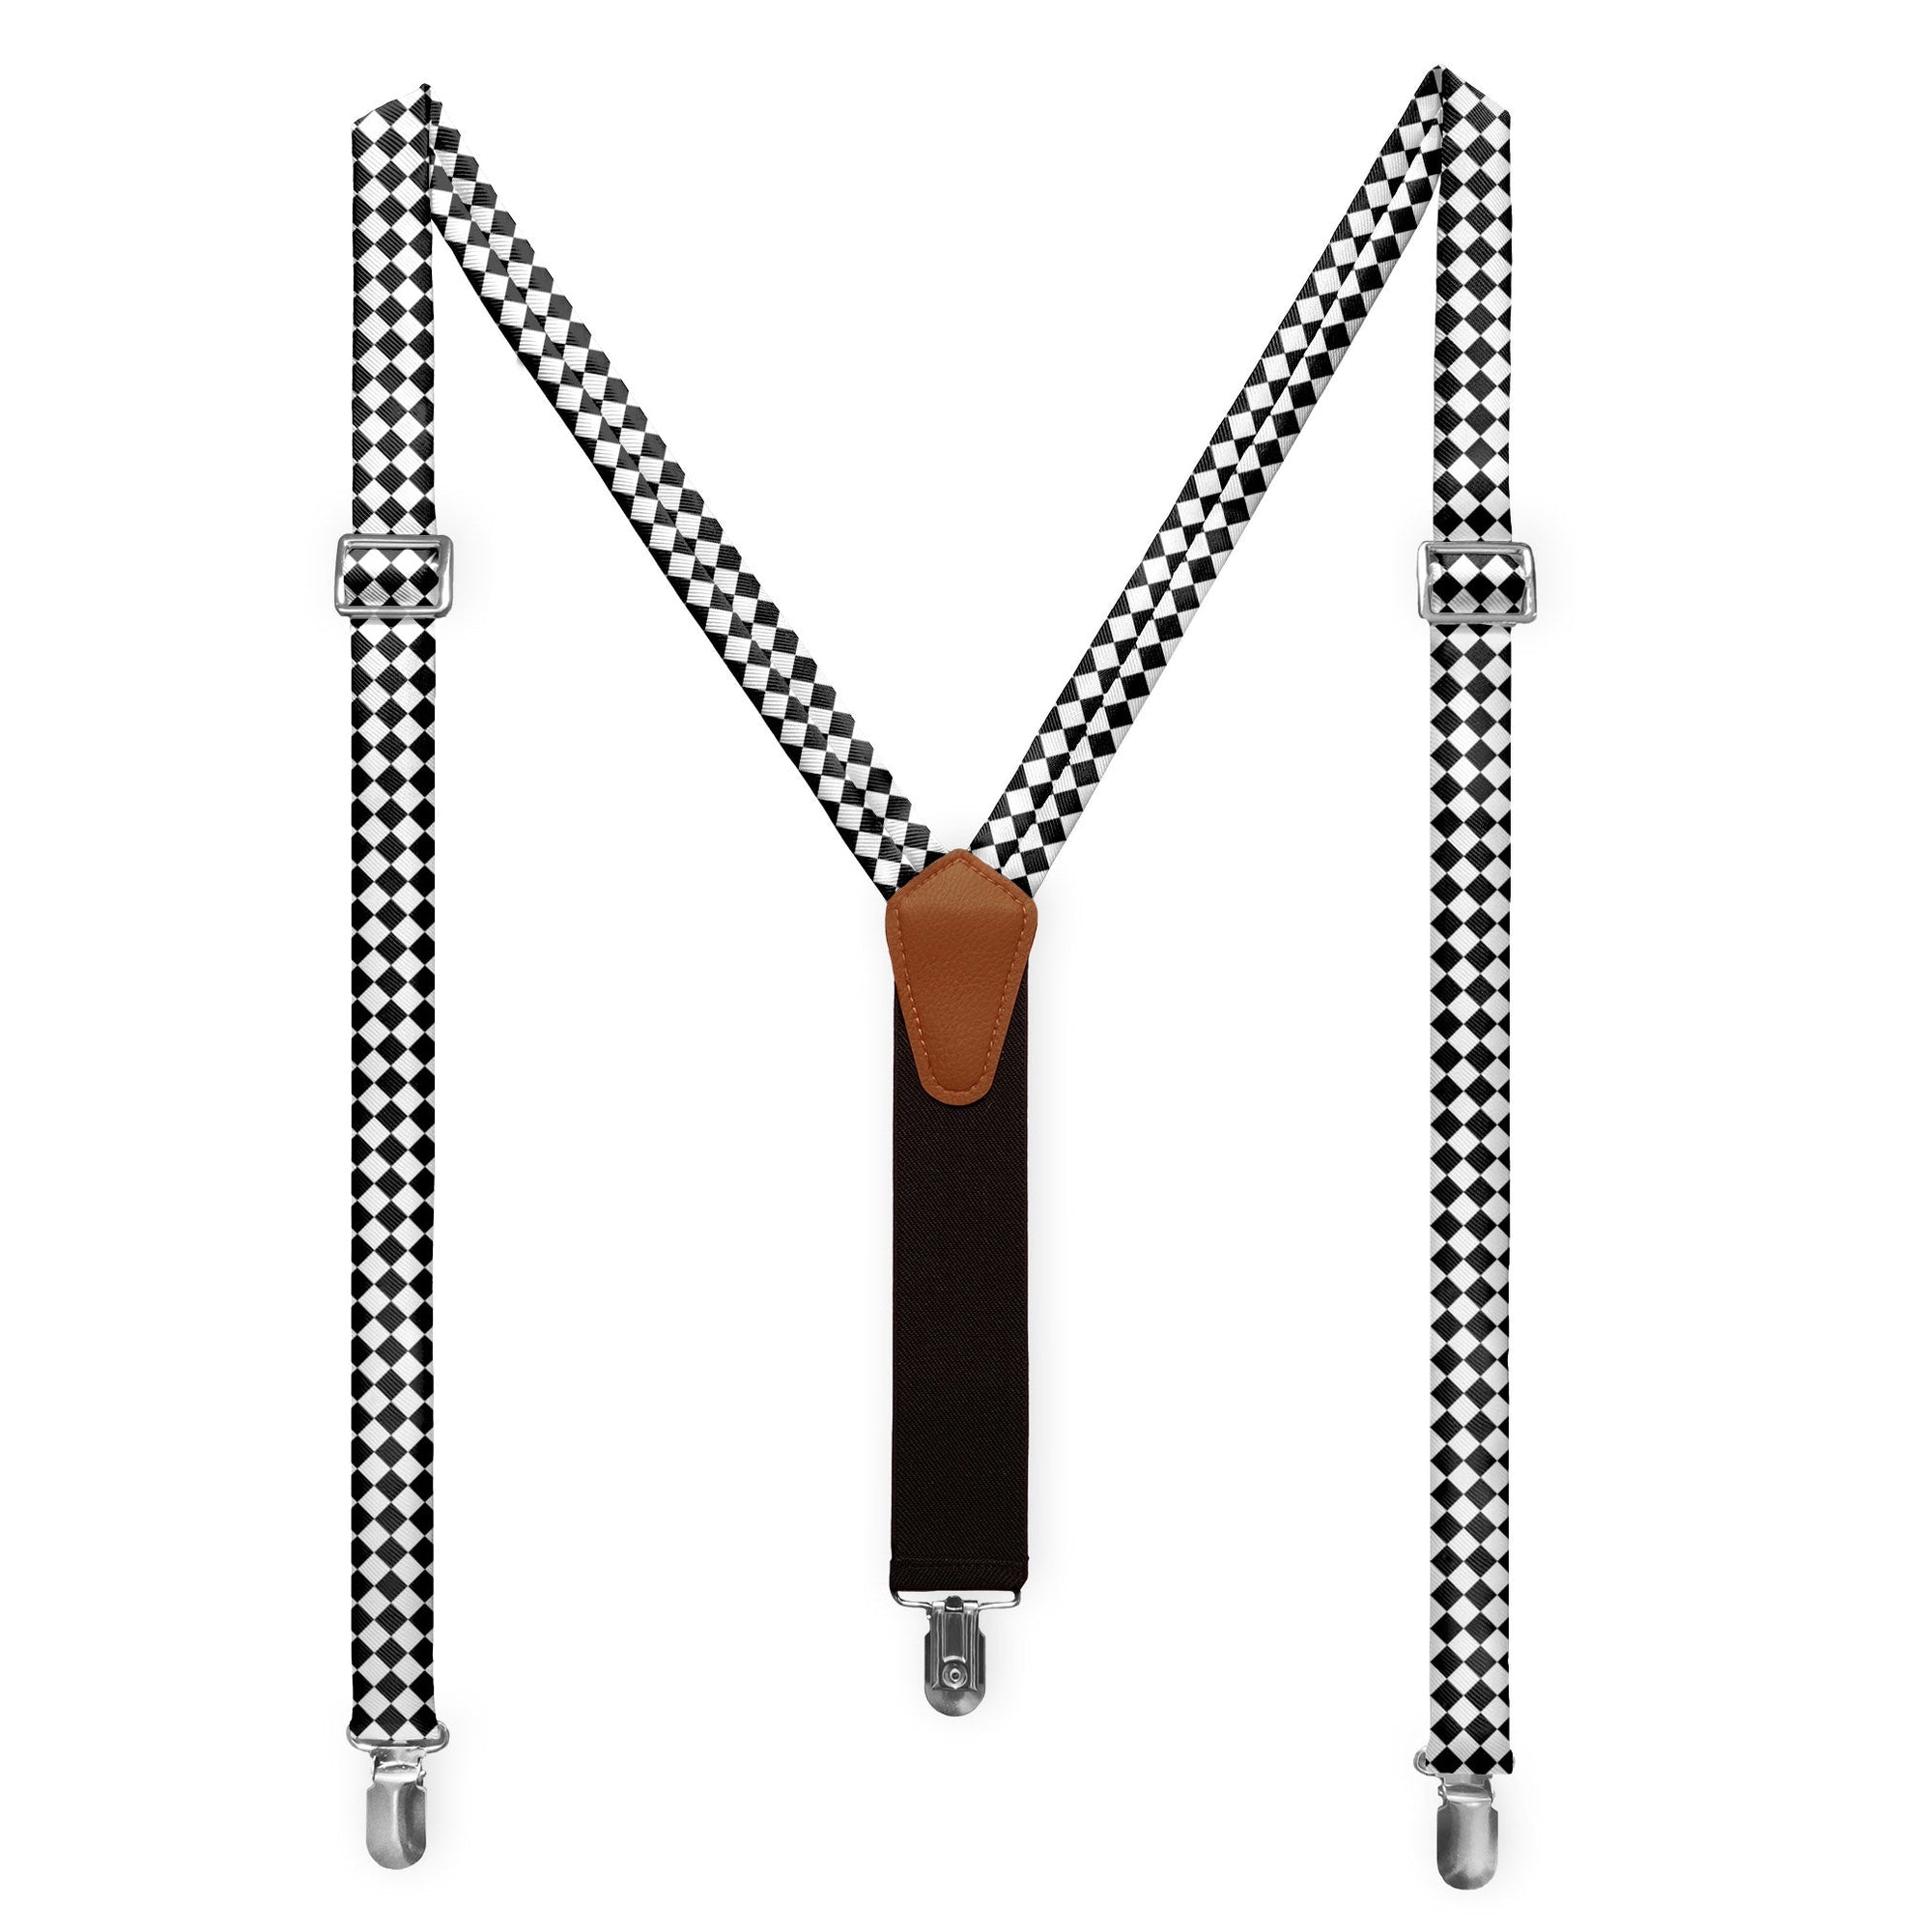 Checkered Tile Suspenders -  -  - Knotty Tie Co.